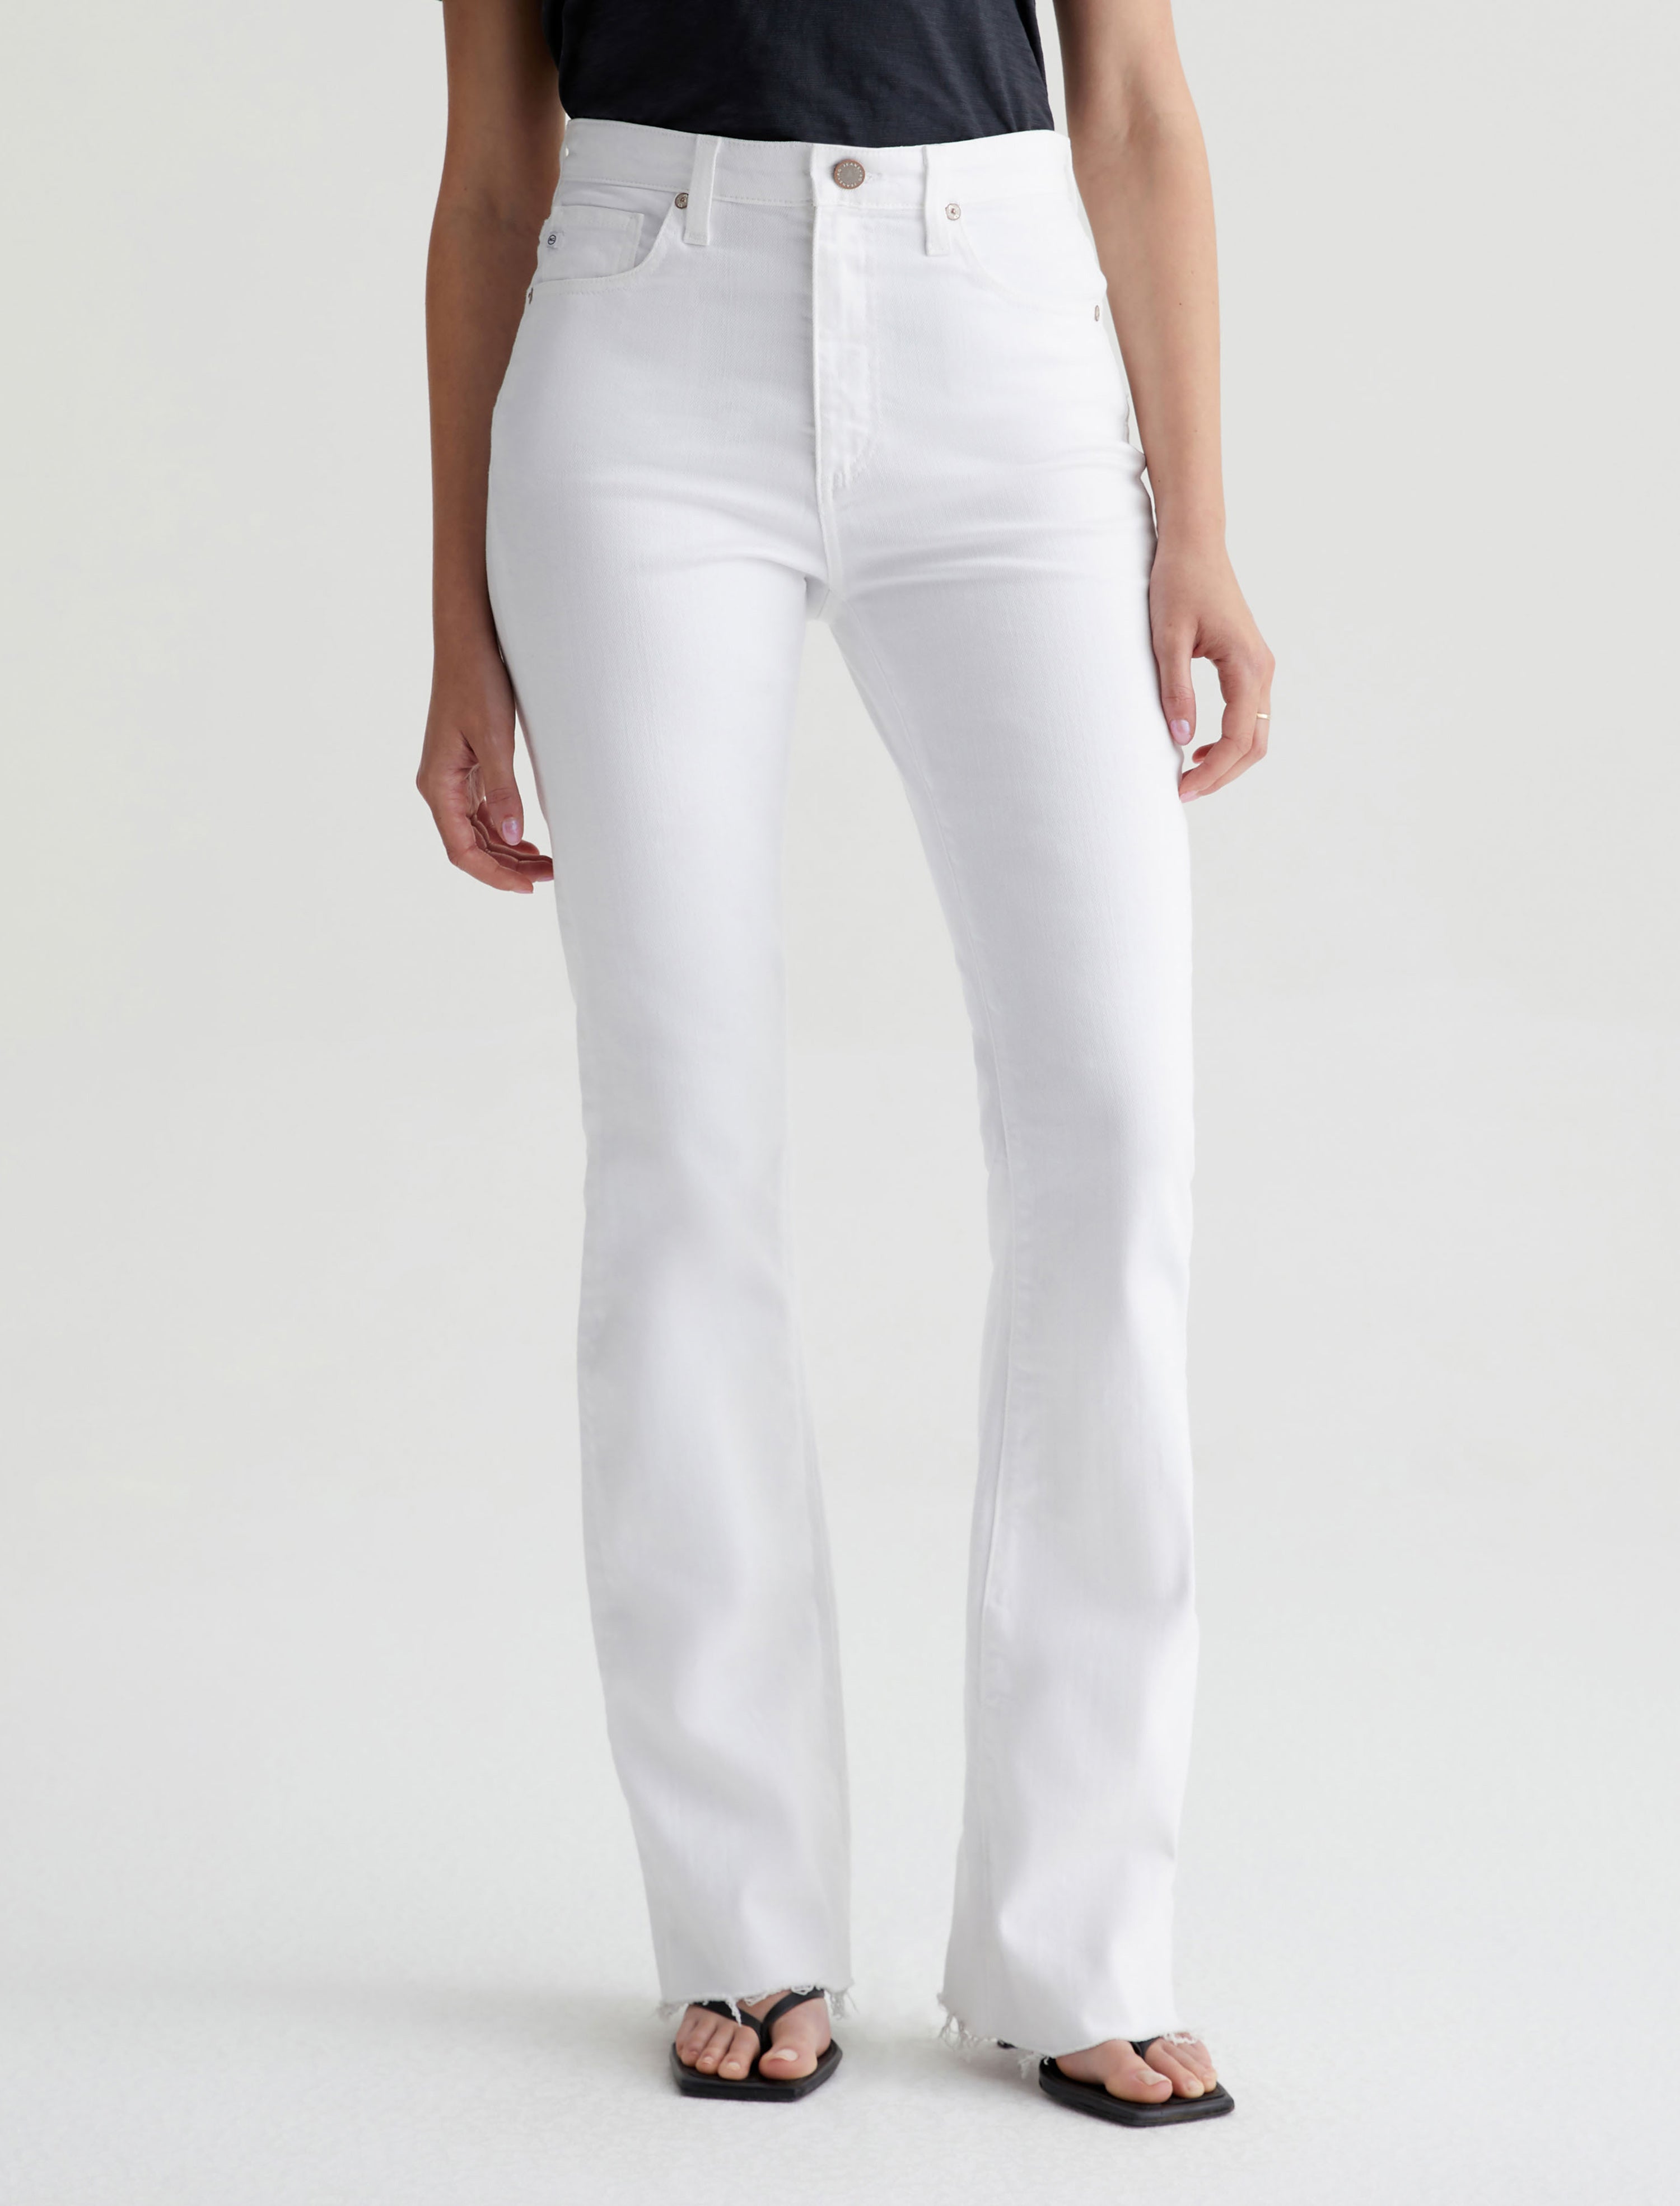 One Pant, 3 Looks - How to Wear the White Wide Leg Trouser | Wide leg jeans  outfit, White wide leg trousers, White jeans plus size